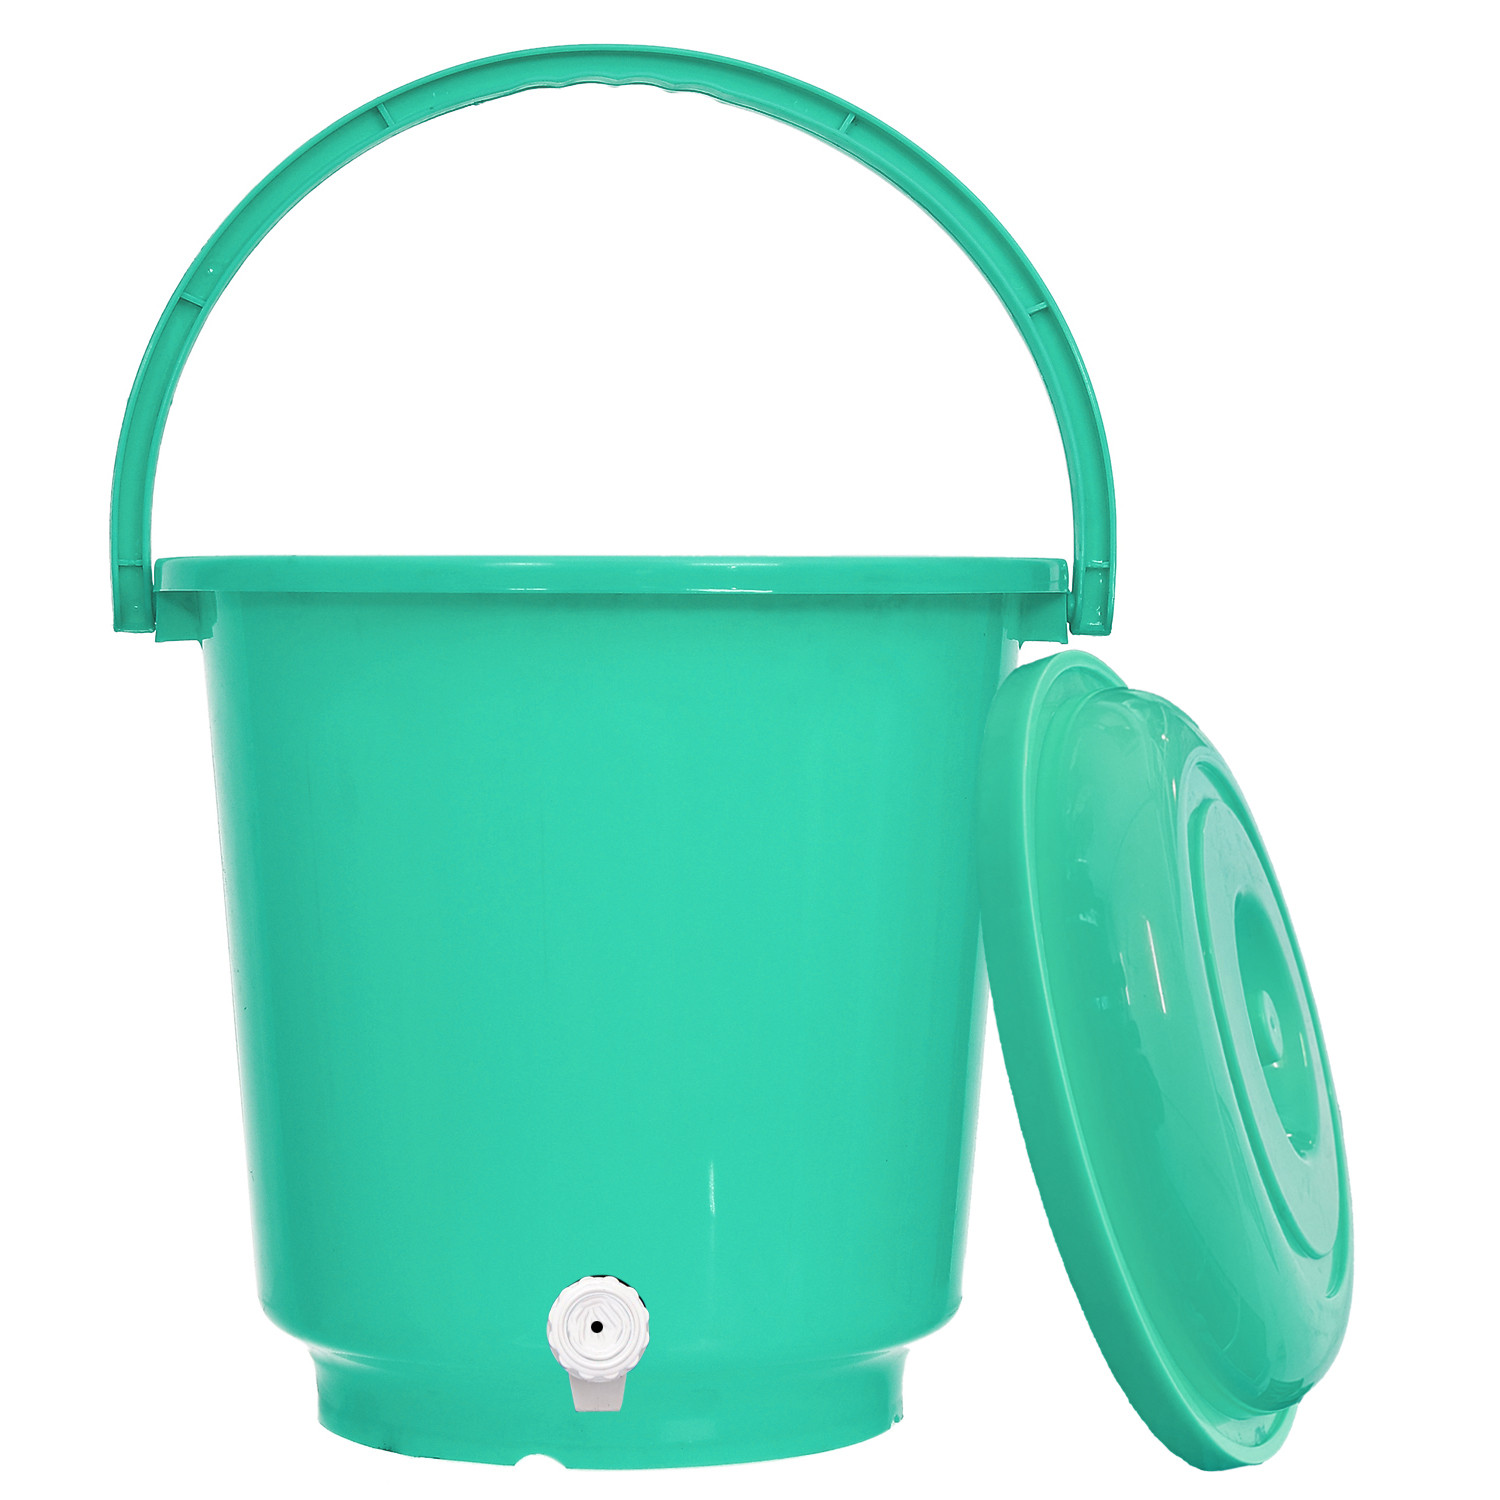 Kuber Industries Multipurposes Plastic Bucket With Lid & Tap System For Home Cleaning & Save Water, 18Ltr. (Green)